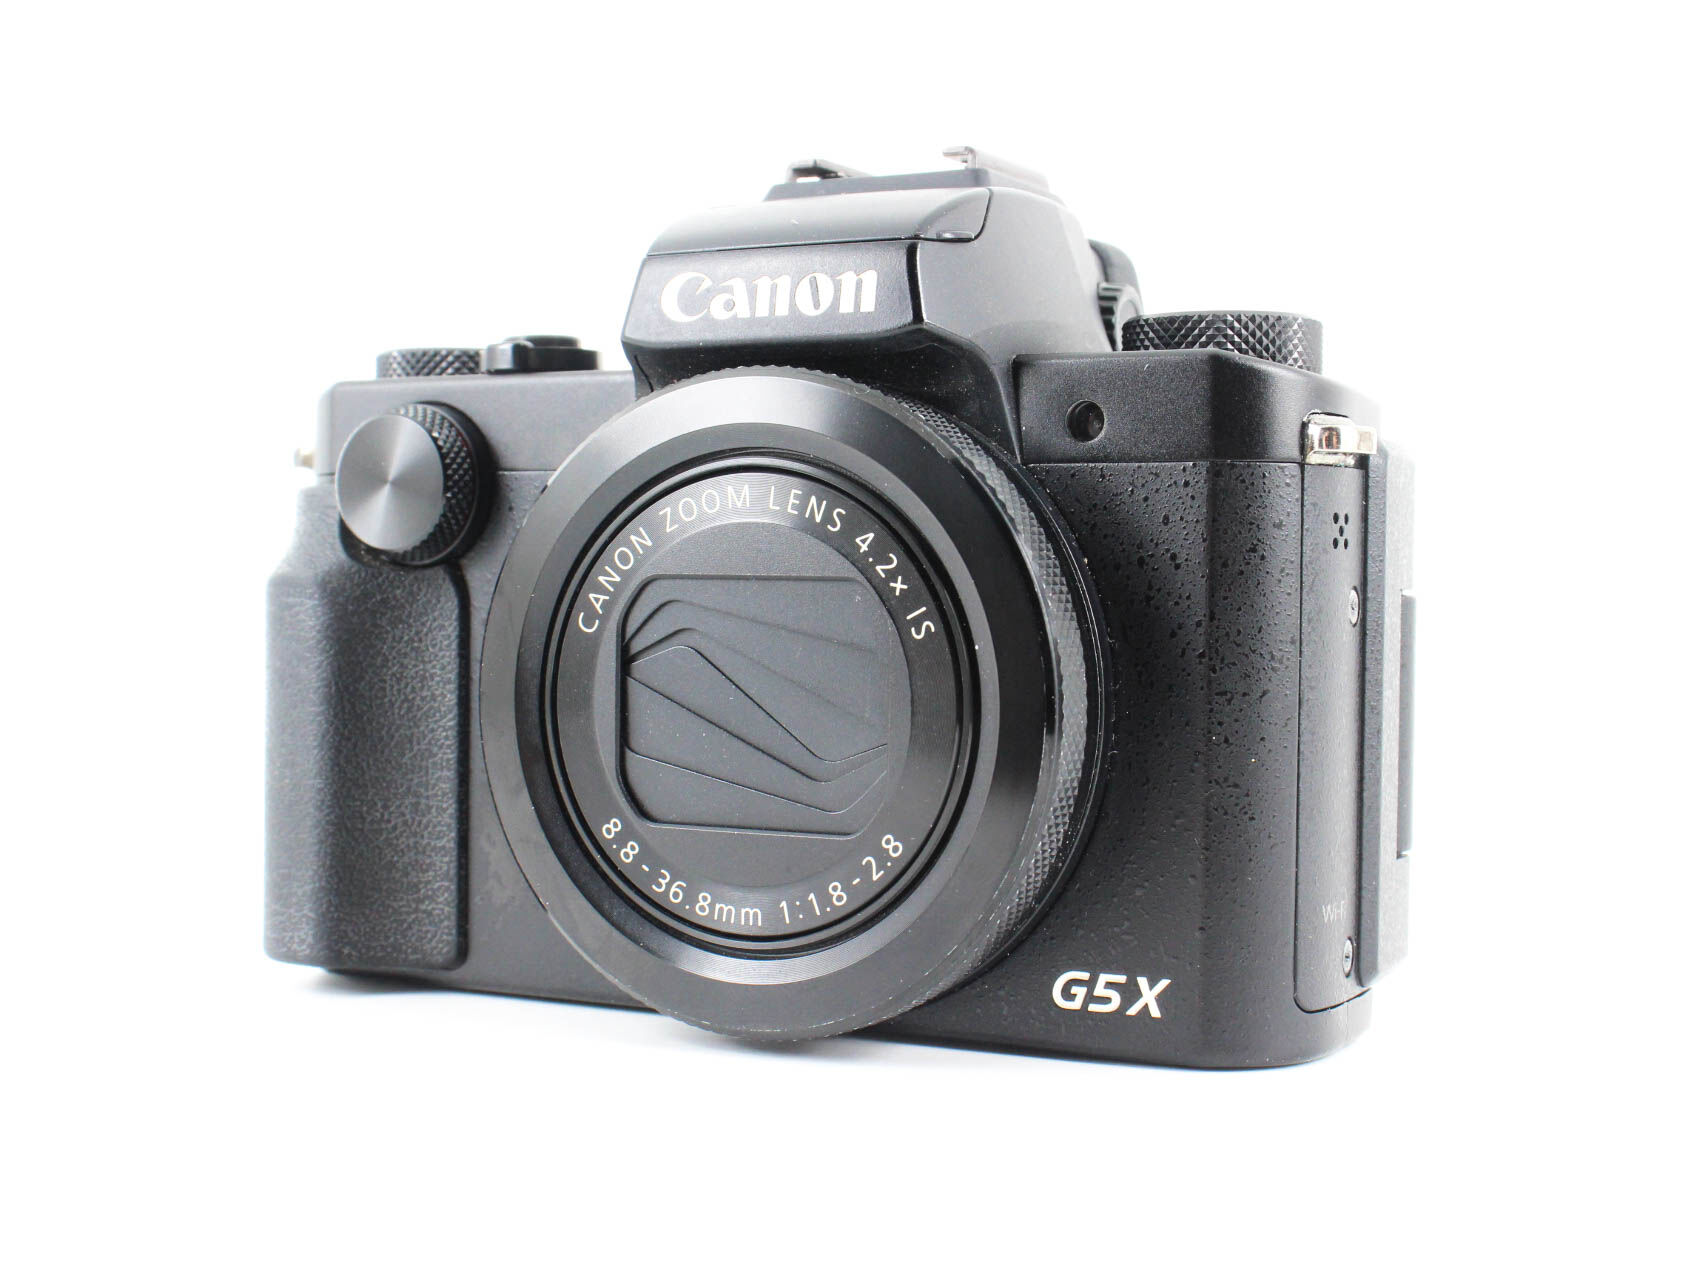 Canon PowerShot G5 X (Condition: Like New)